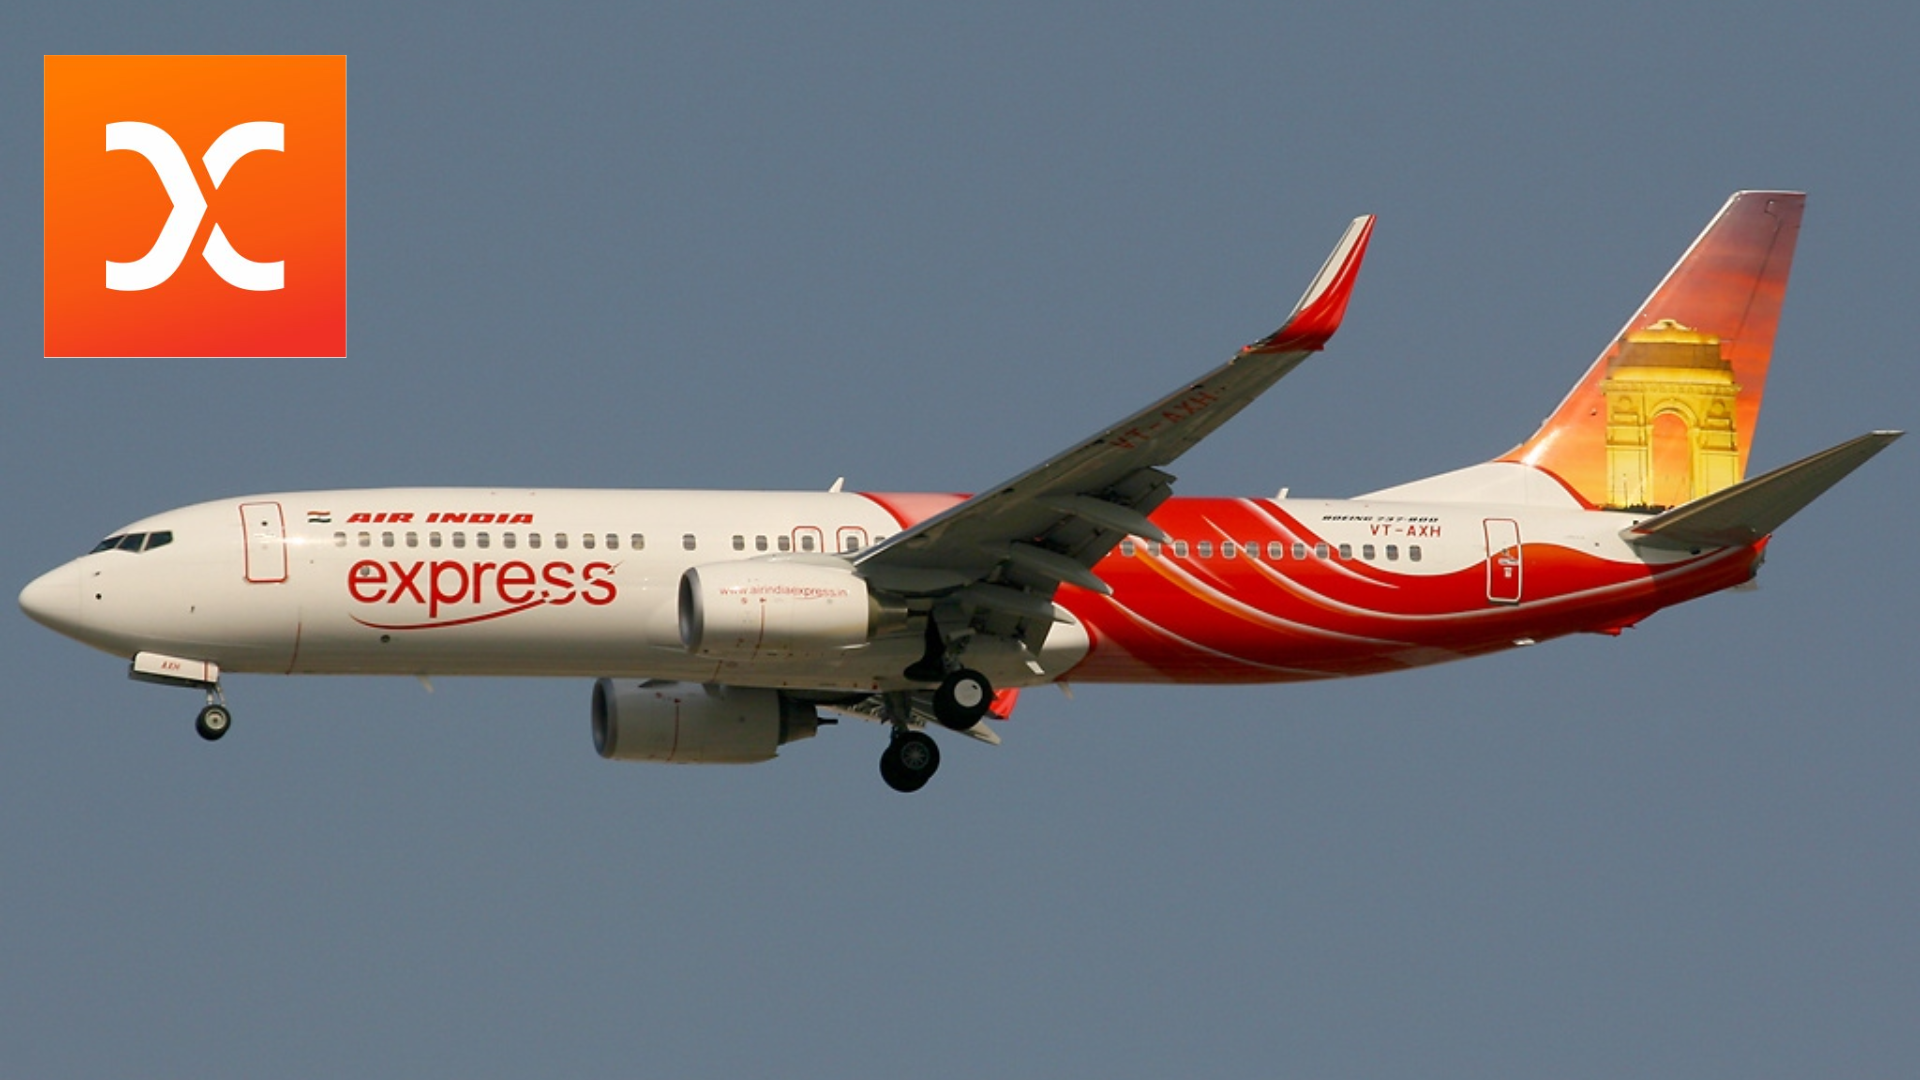 Air India Express Scraps 70 Flights Due to ‘Mass Sick Leave’ By Crew Members